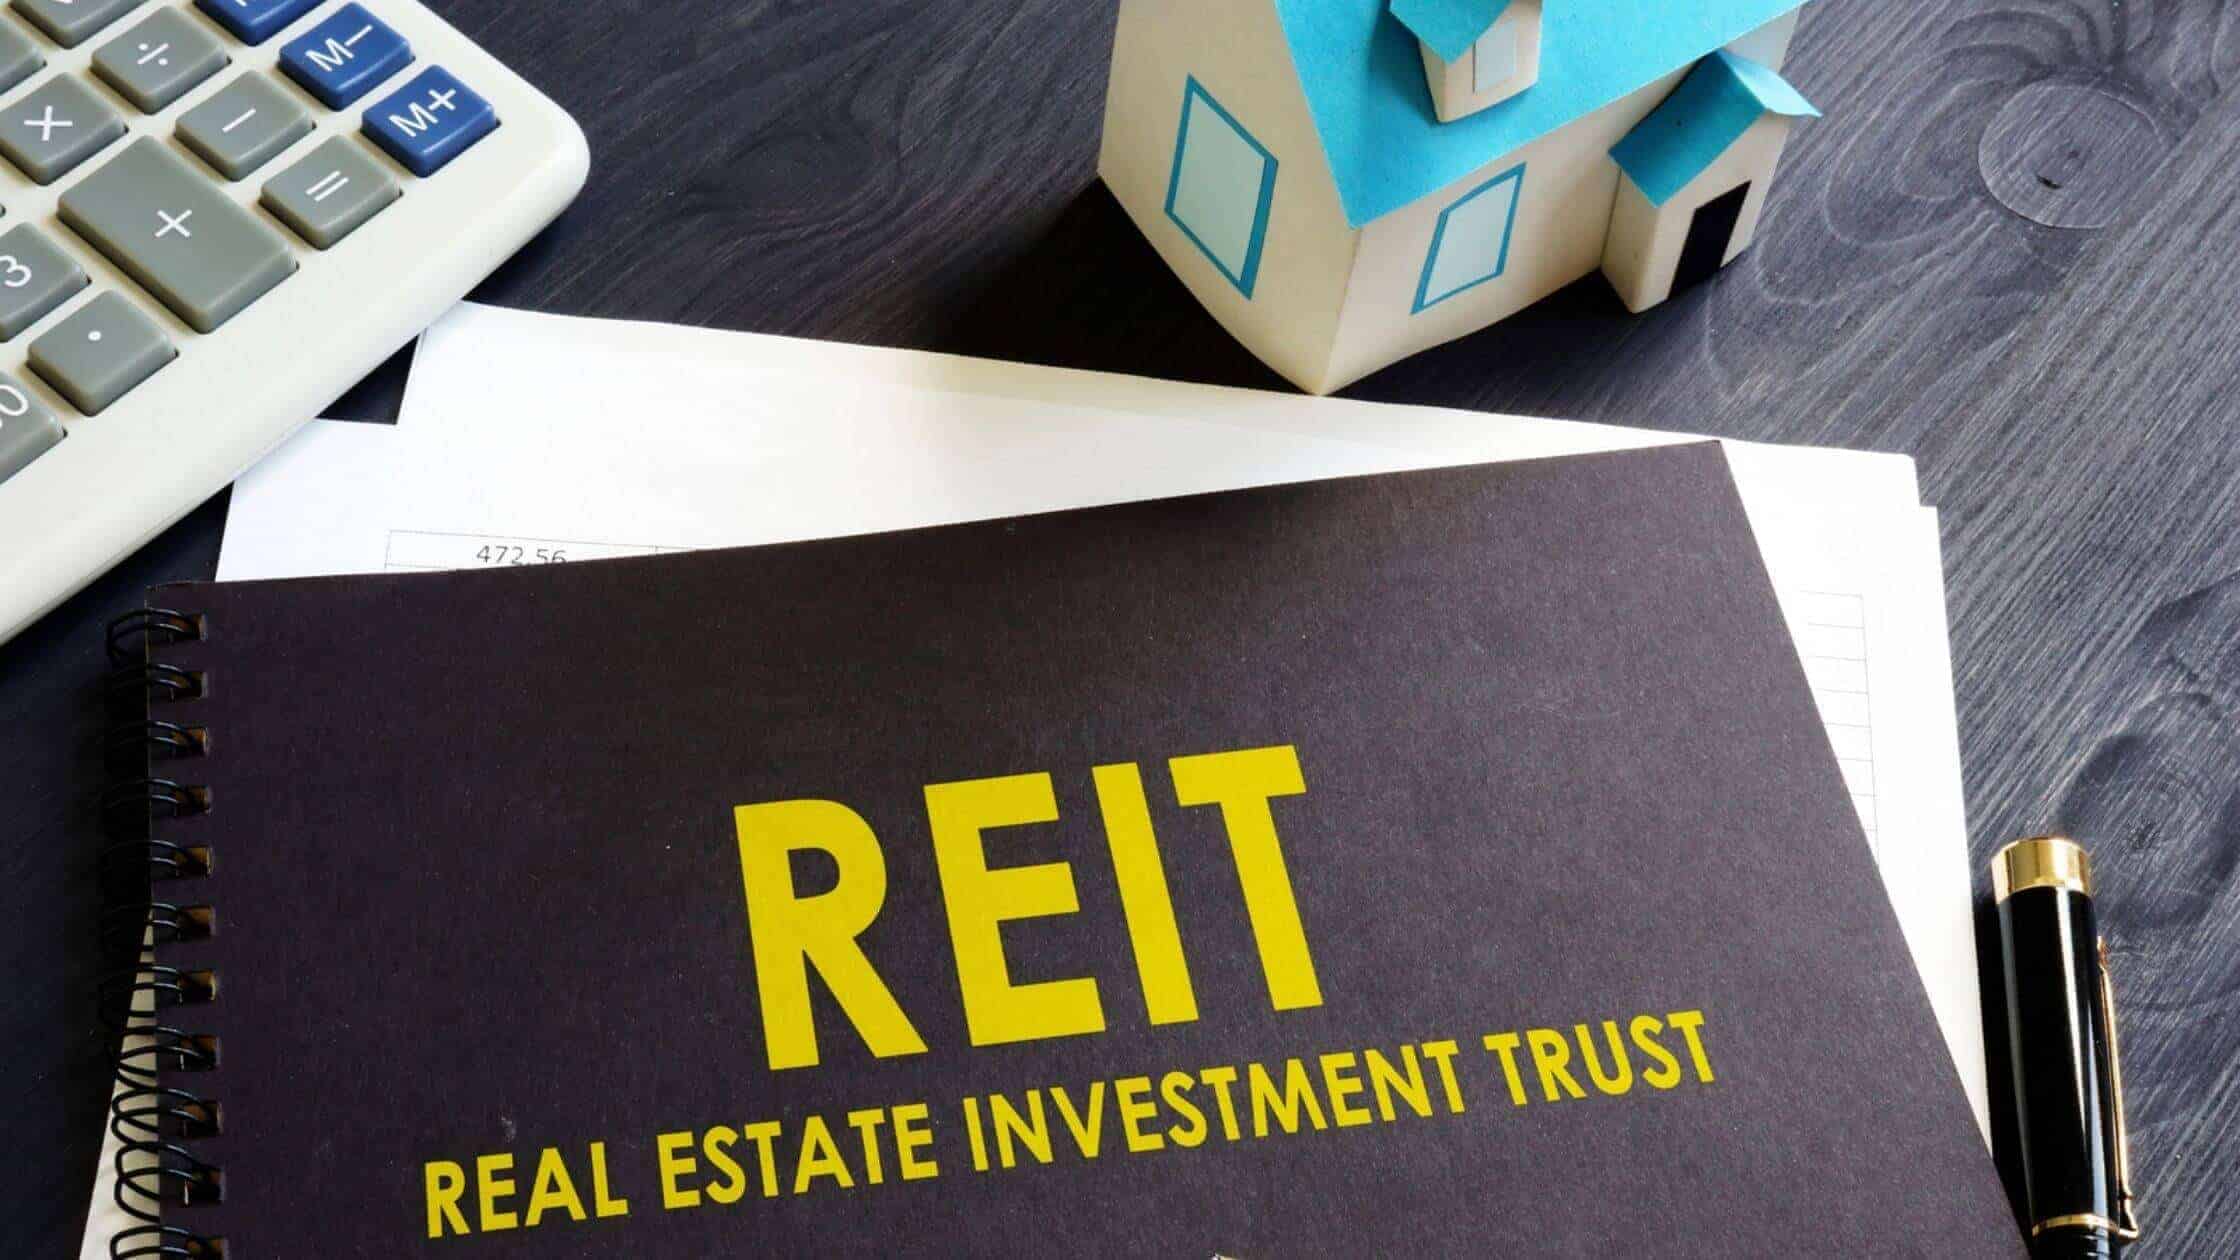 Are Real Estate Investment Trusts (REITs) A Good Investment